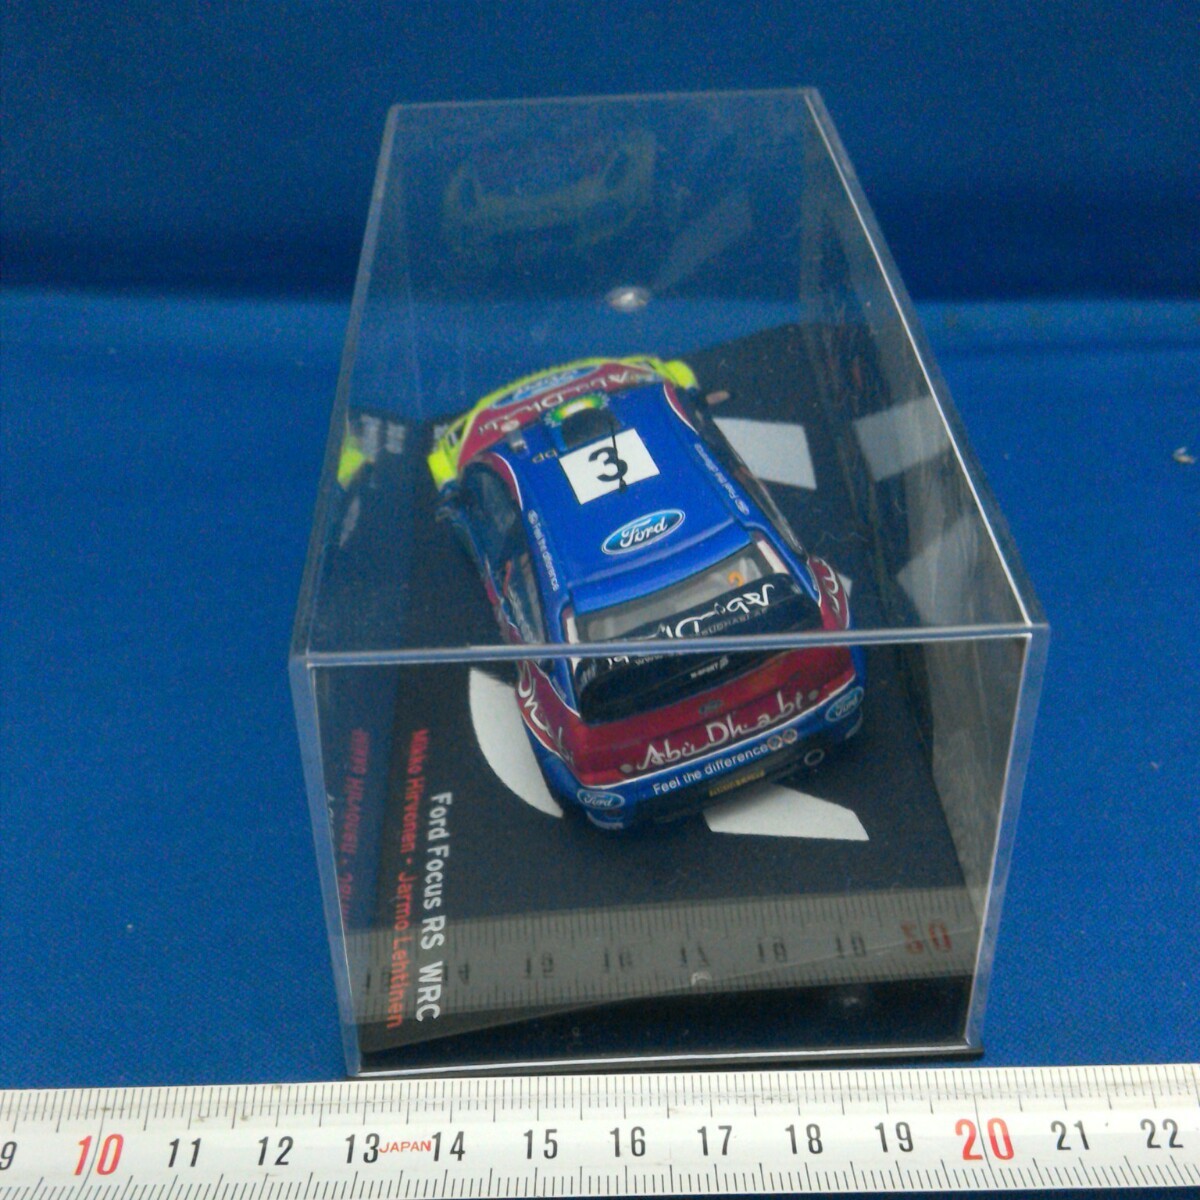 1/43 Ford Focus RS WRC